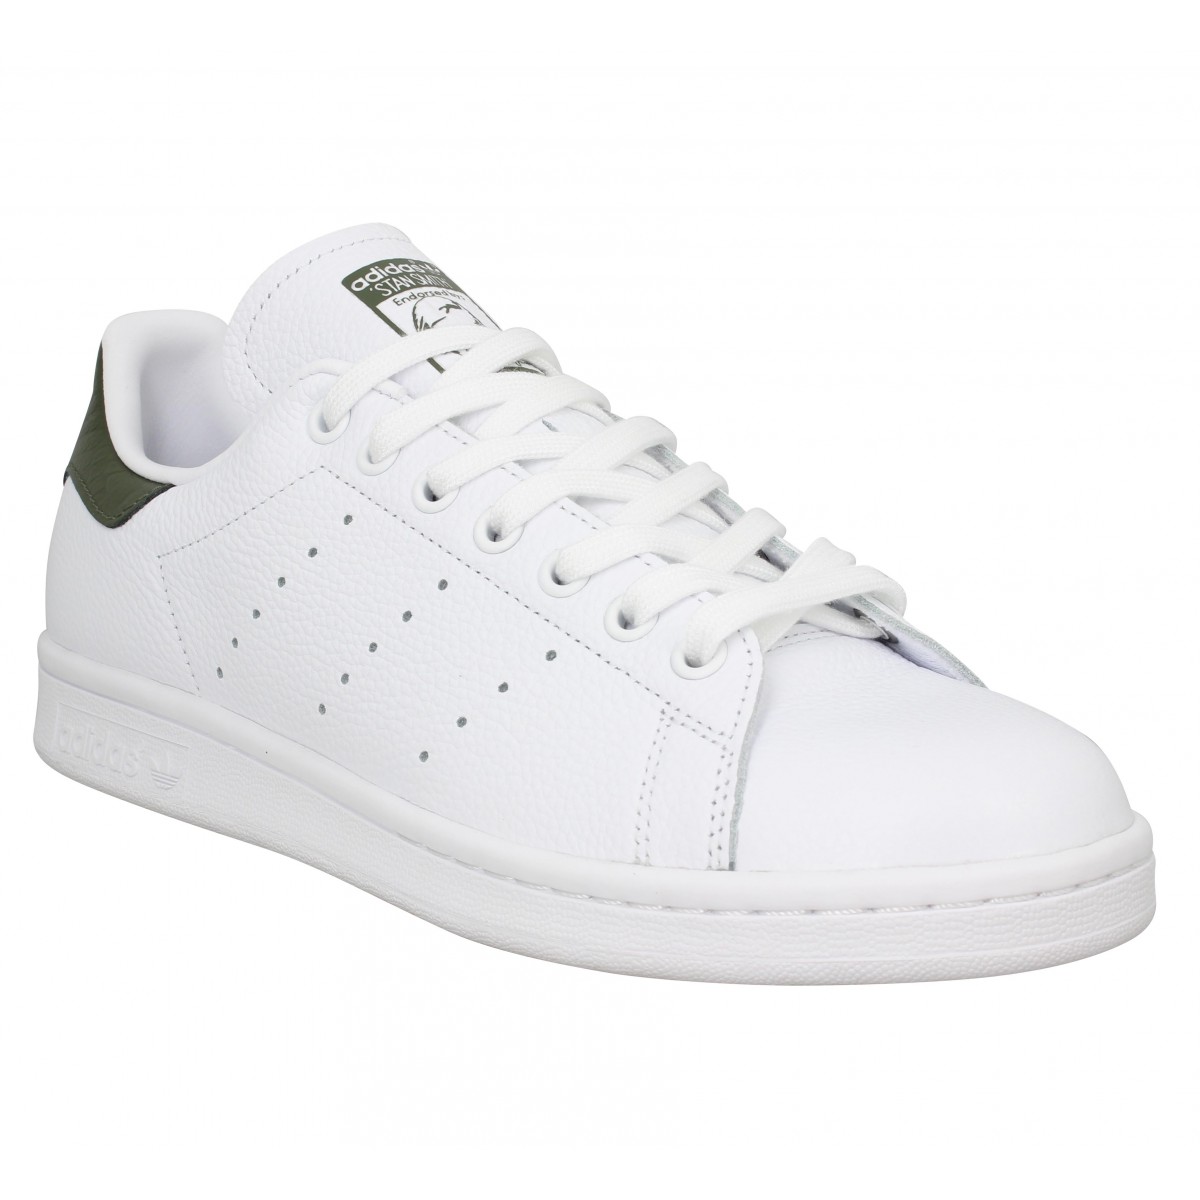 adidas stan smith blanche et or